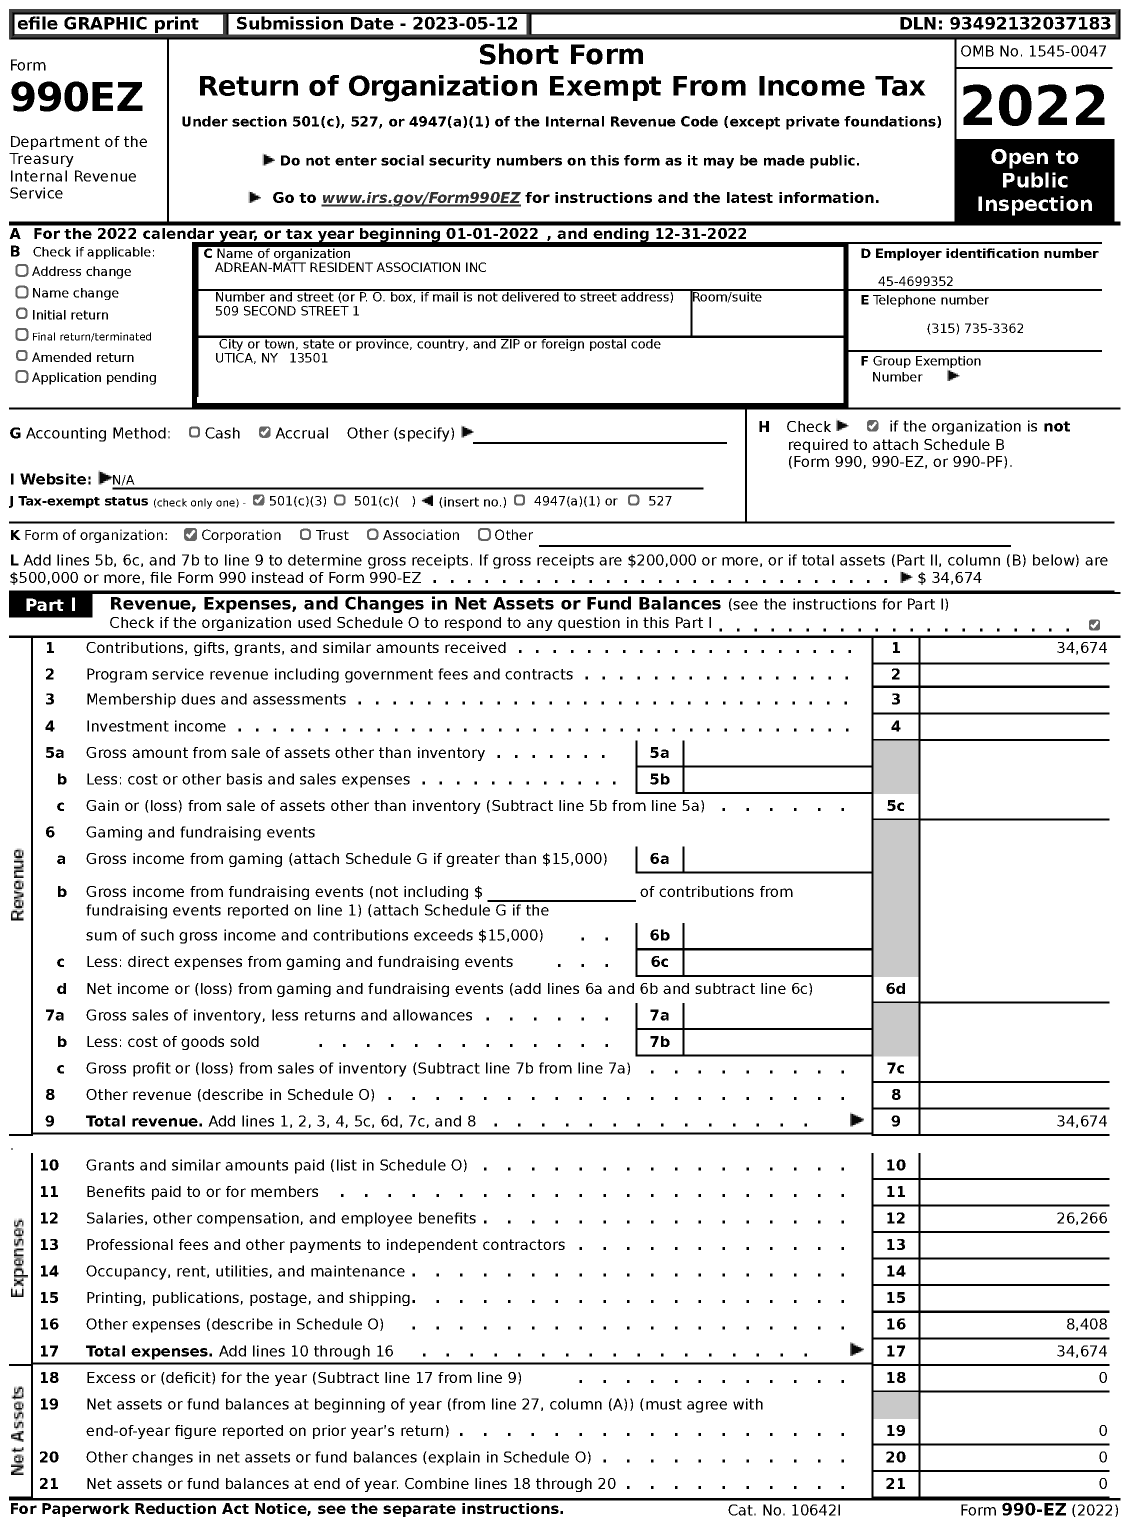 Image of first page of 2022 Form 990EZ for Adrean-Matt Resident Association